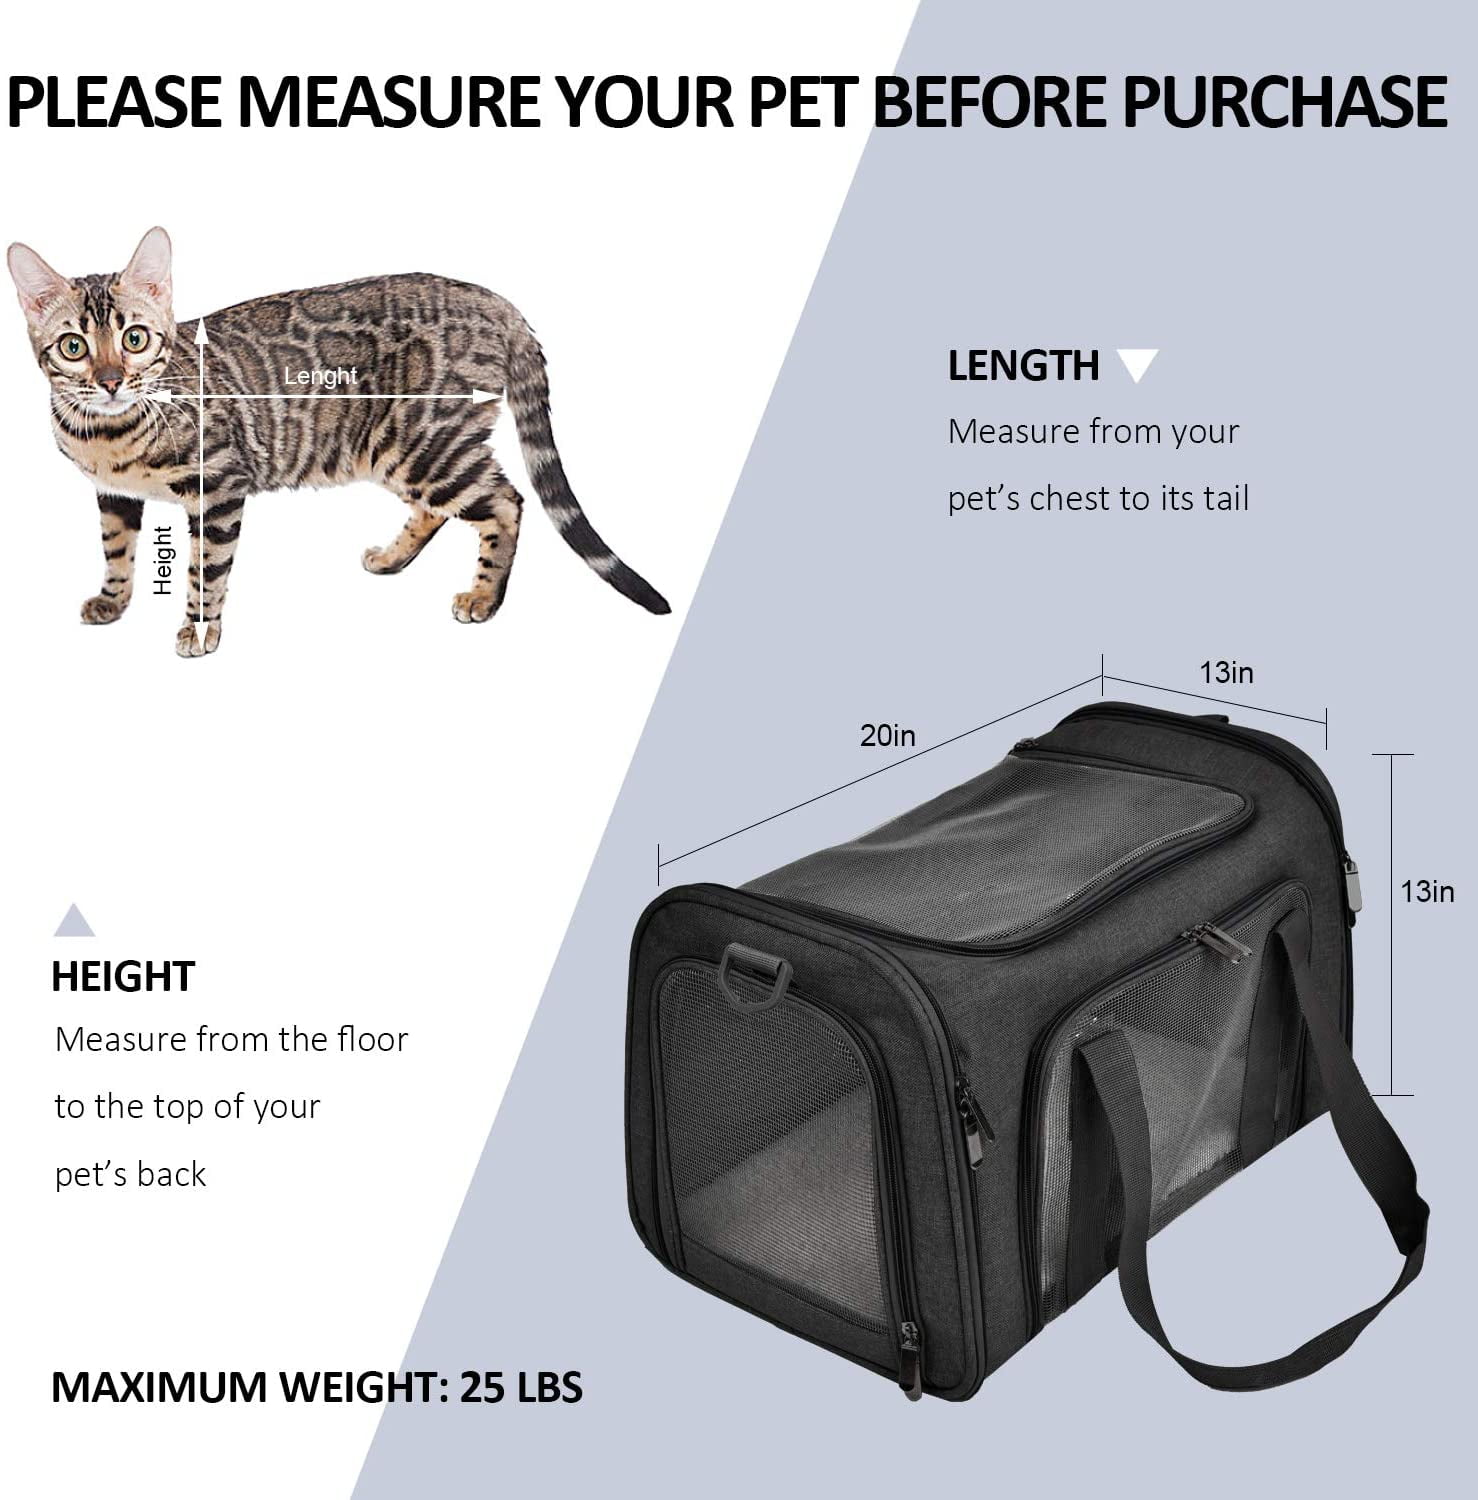 Henkelion Large Cat Carriers Dog Carrier Pet Carrier for Large Cats Dogs Puppies Up to 25lbs Big Dog Carrier Soft Sided Collapsi, Grey